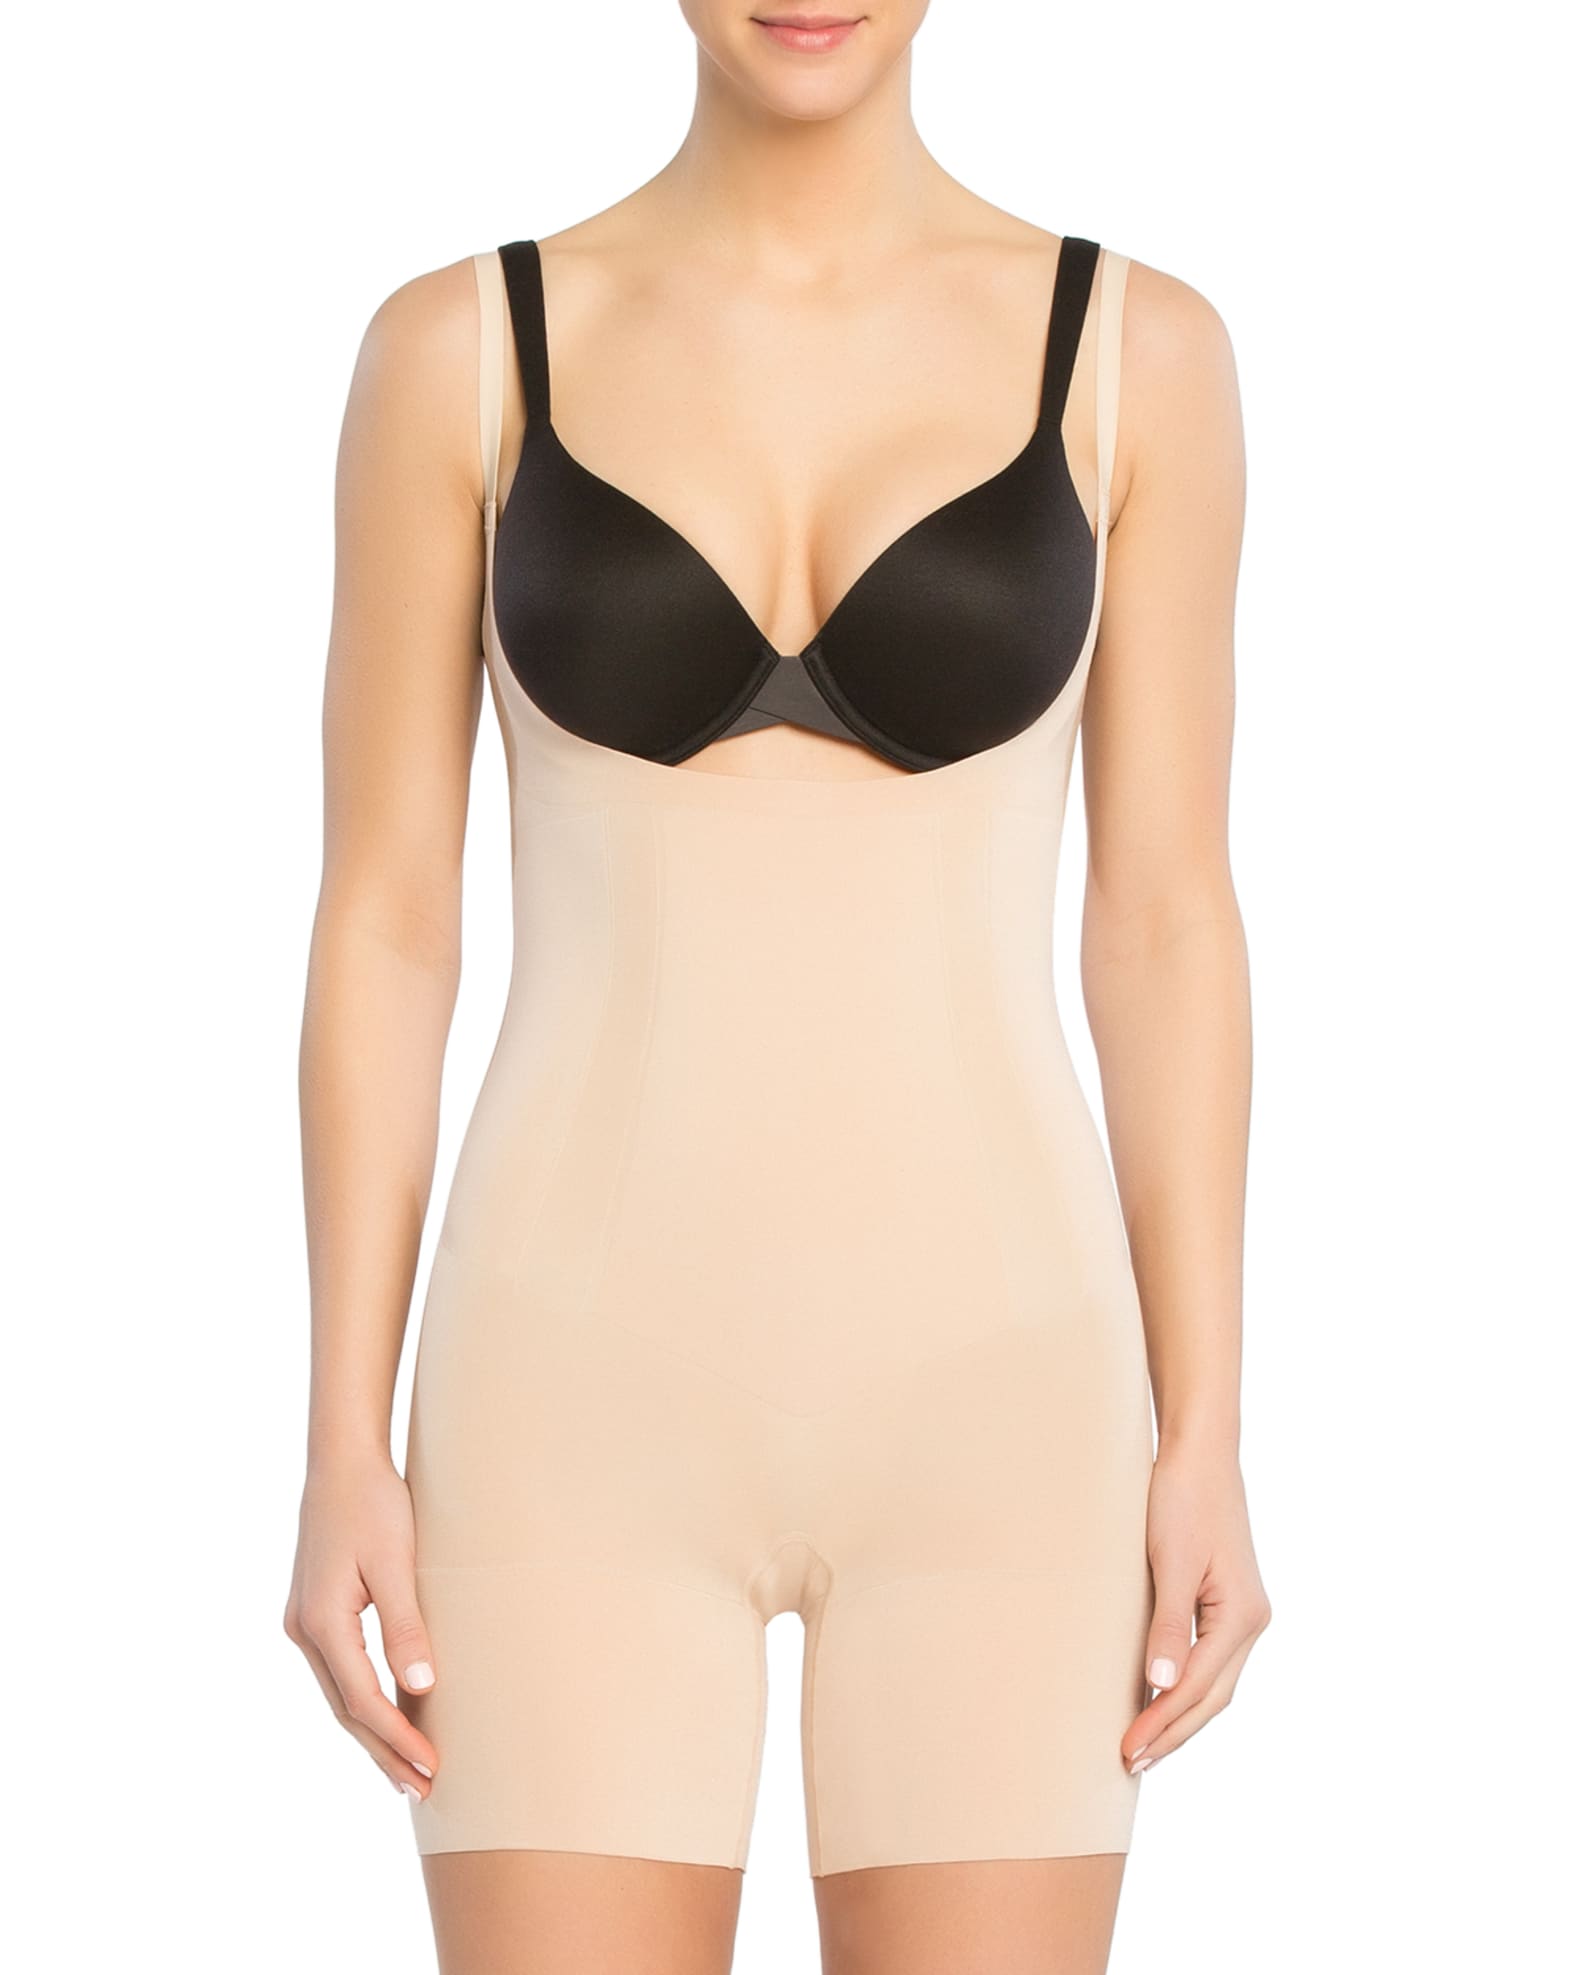 Thong Compression Bodysuit Shaper with Underwire